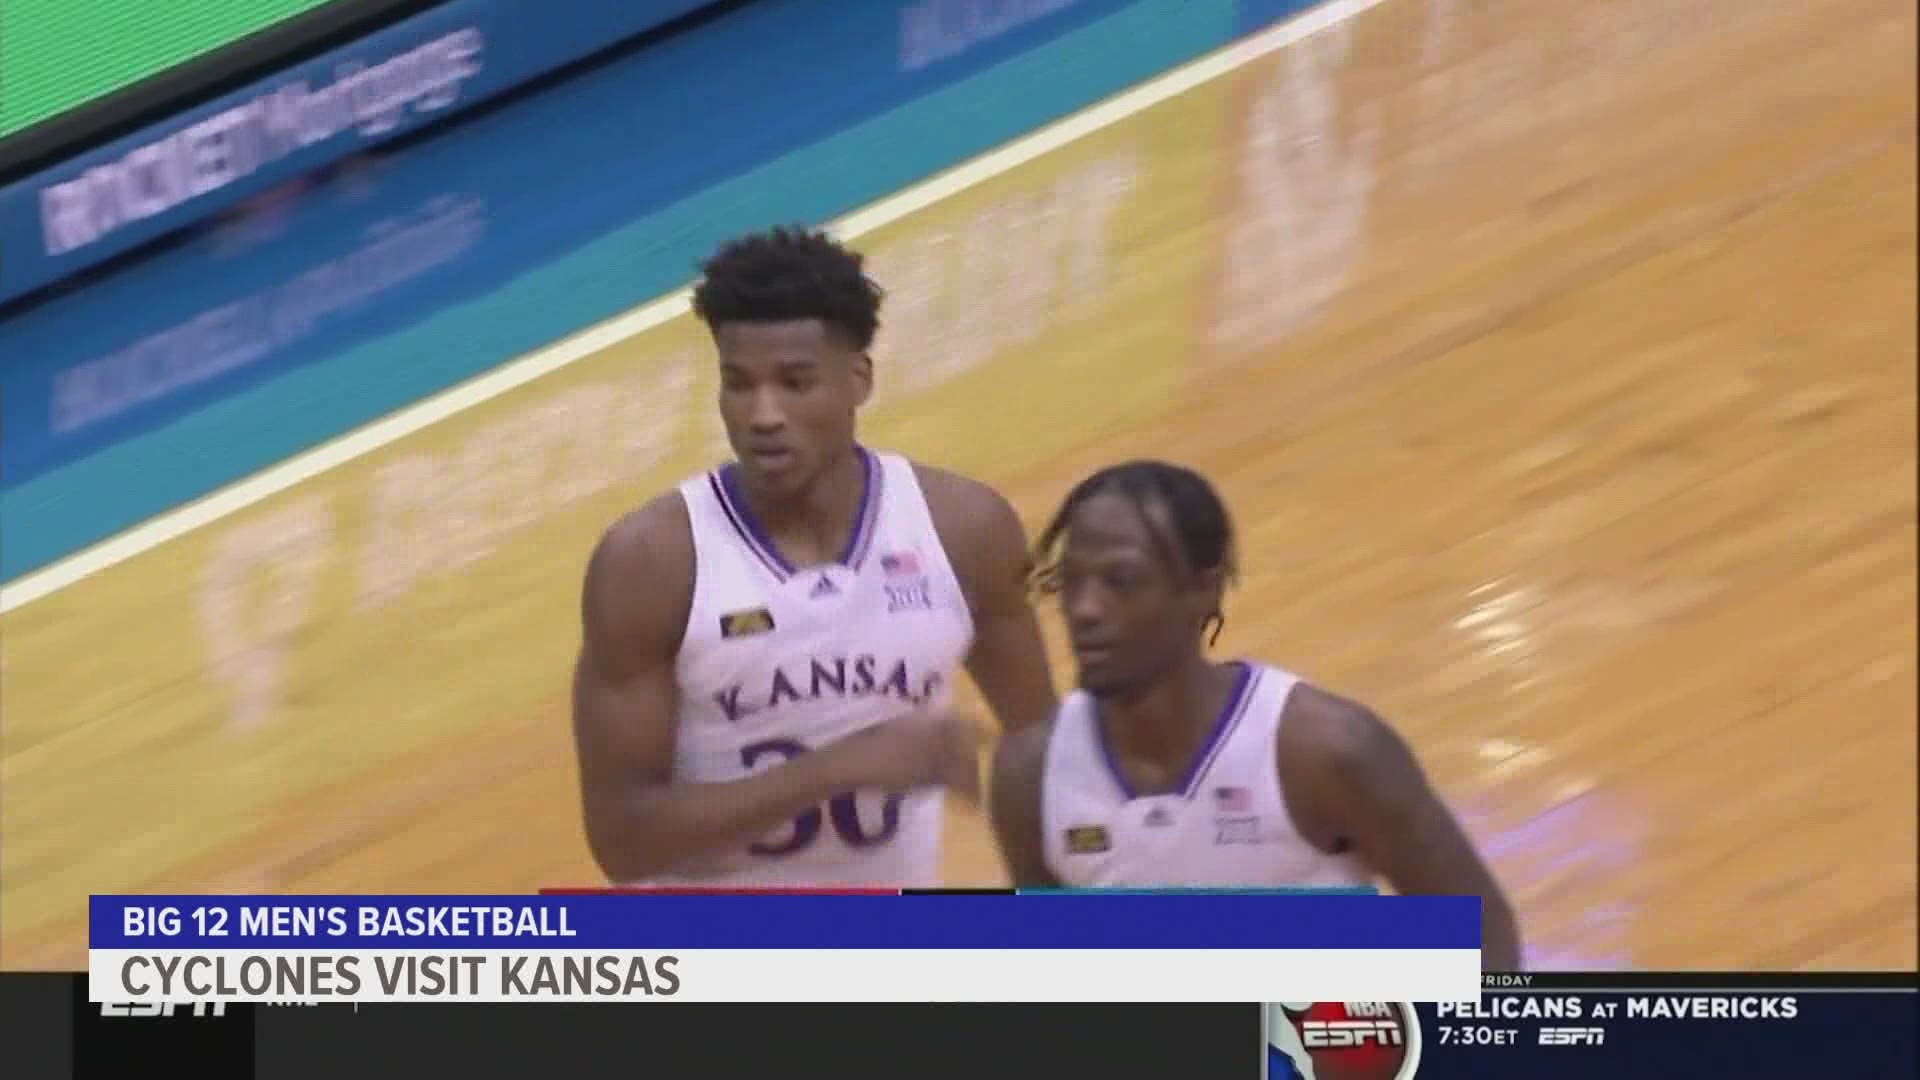 Cyclones fall to Kansas 97-64 in Lawrence, Kansas. ISU is now 0-10 in Big 12 play